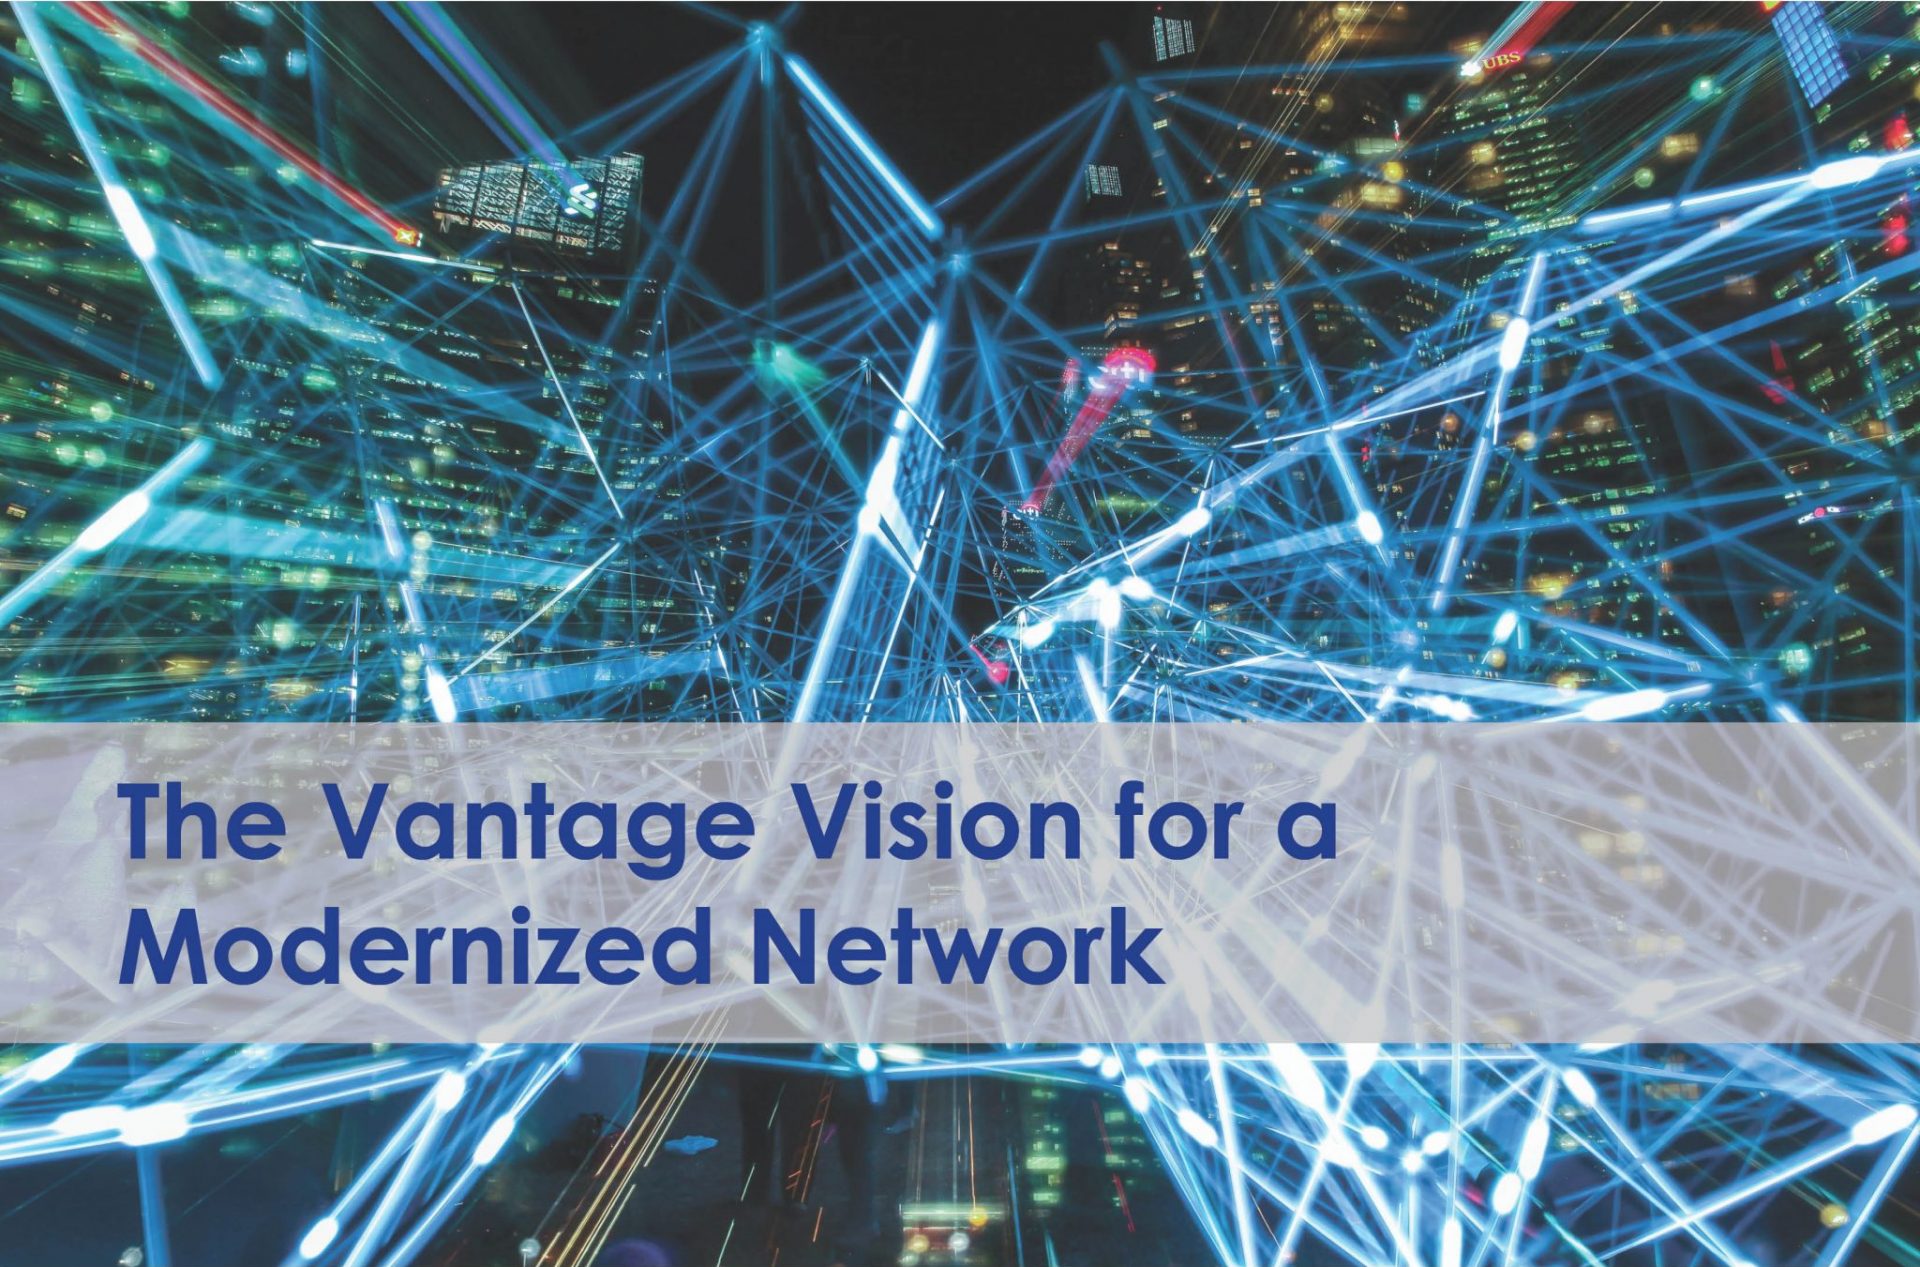 The Vantage Vision for a Modernized Network